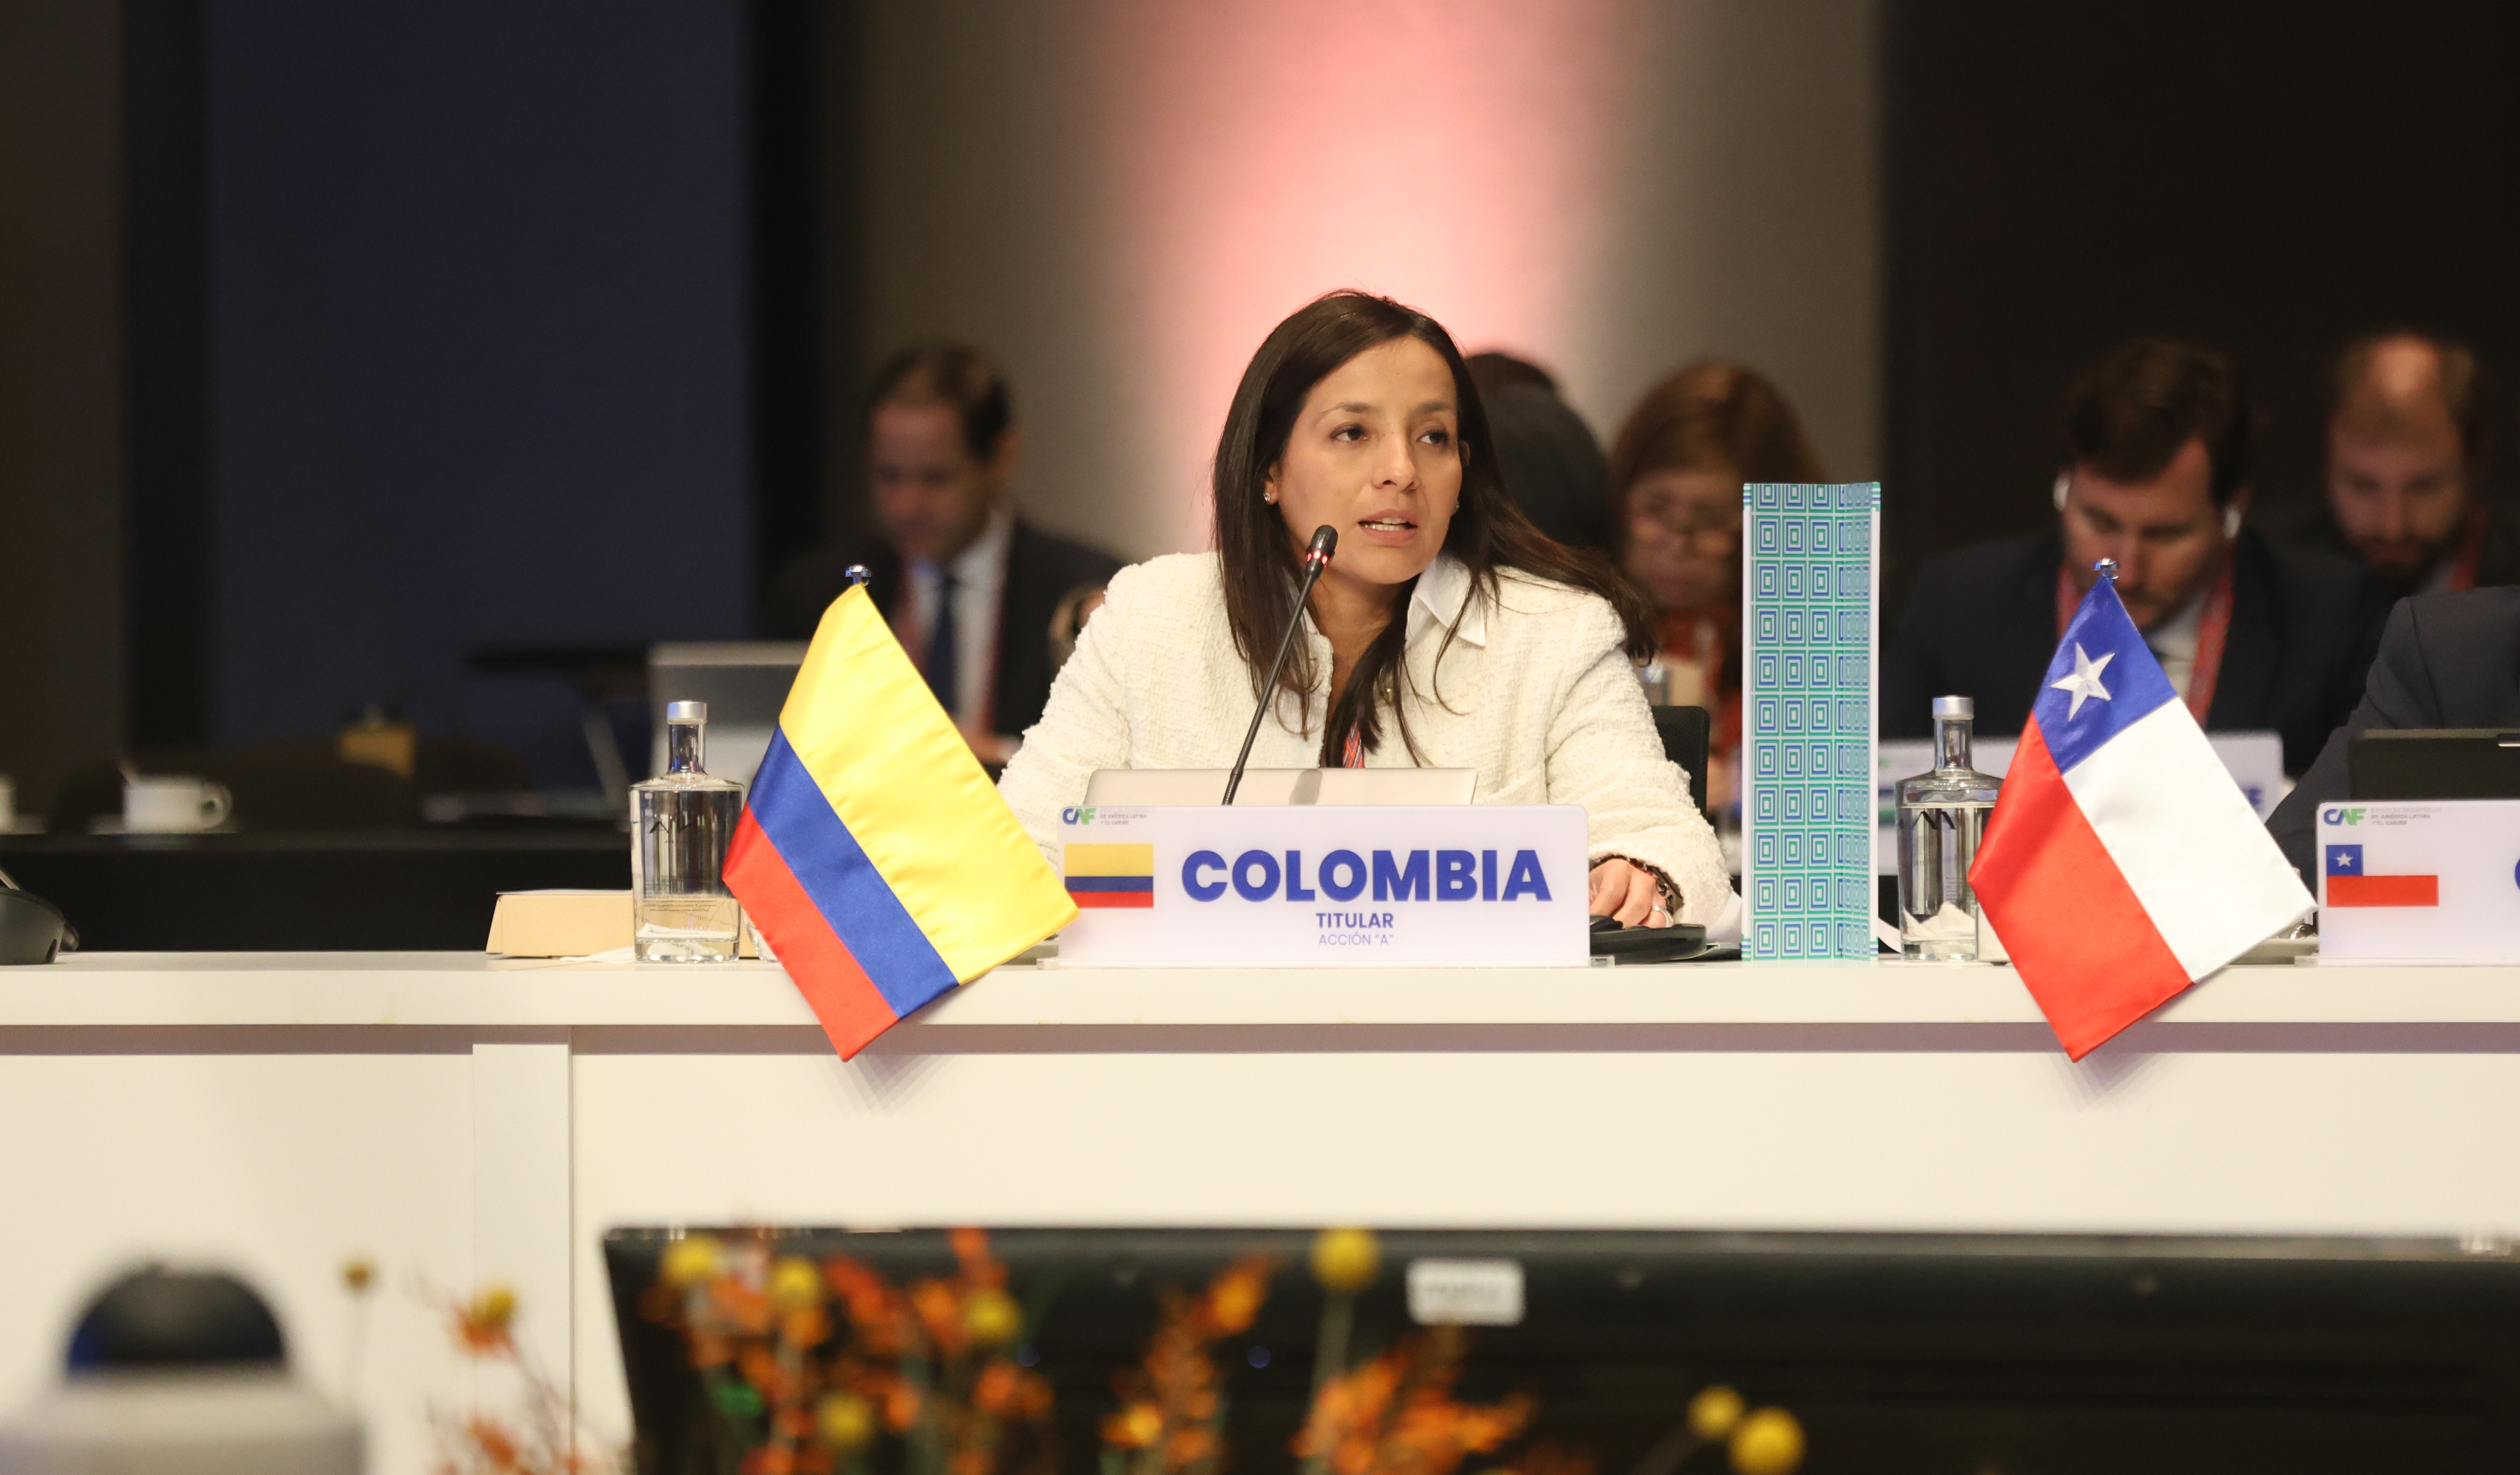 CAF approves USD 350 million for territorial development in Colombia